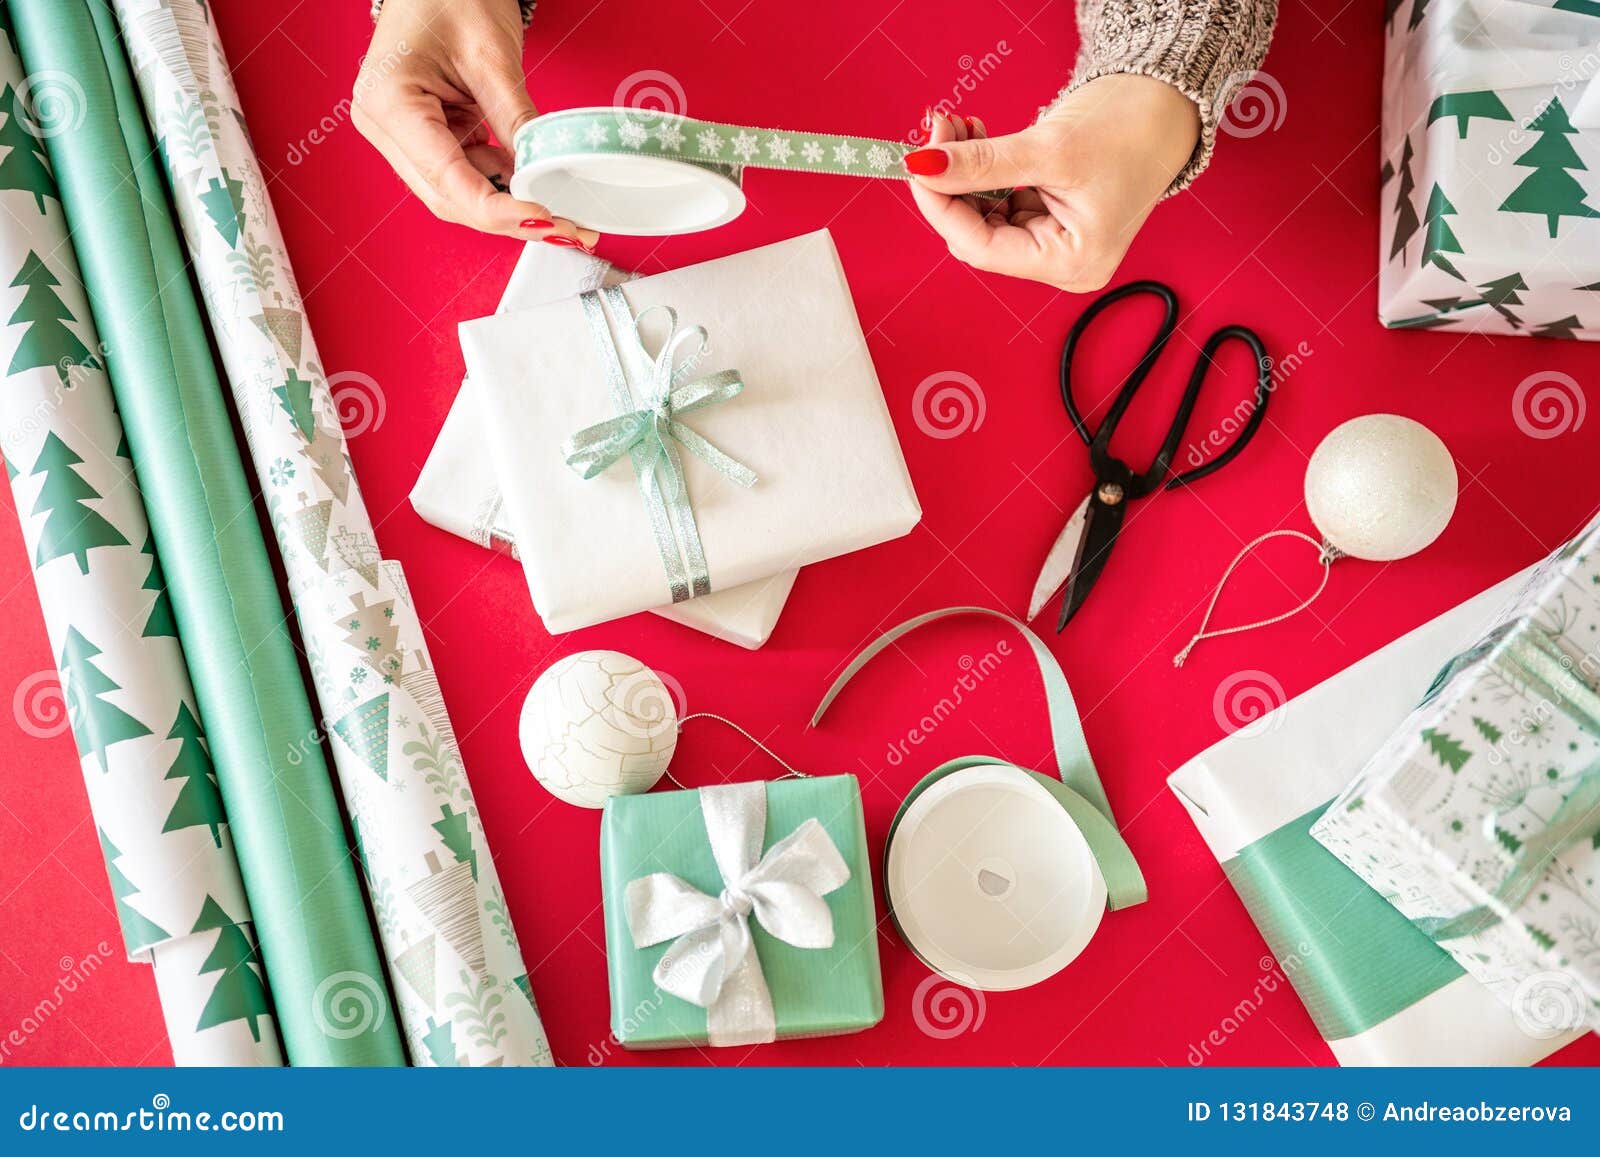 diy gift wrapping. unrecognisable woman wrapping beautiful nordic style christmas gifts. hands close up.